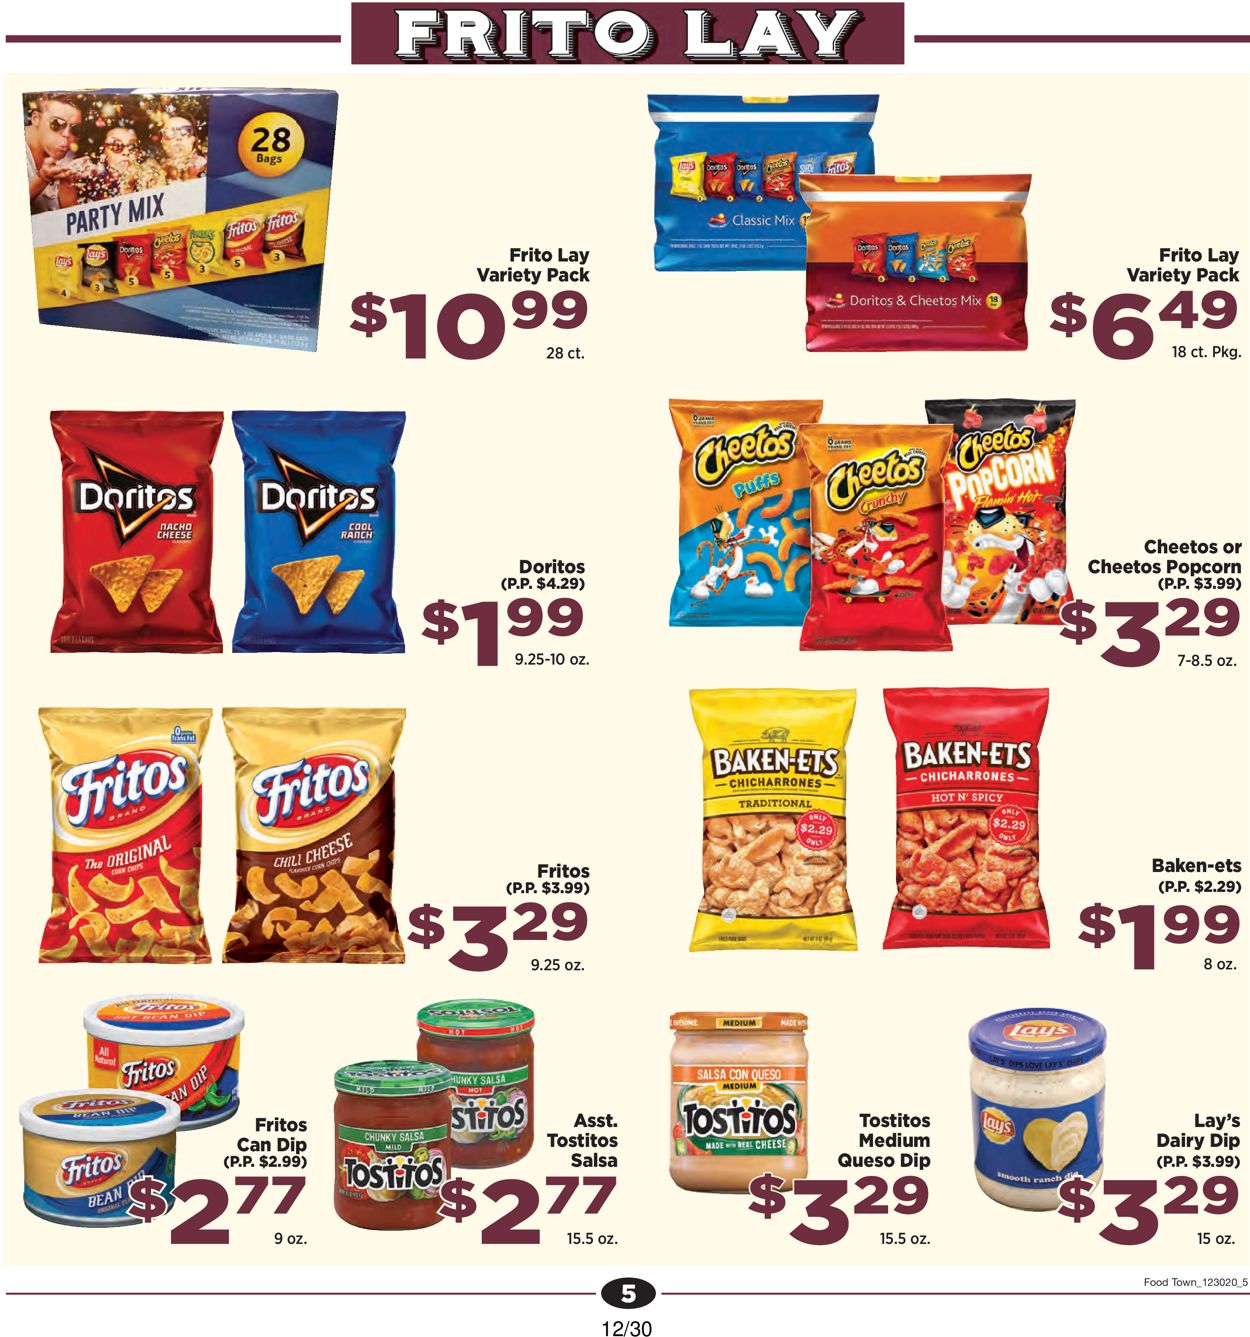 Catalogue Food Town Specials & Grocery Ad from 12/30/2020